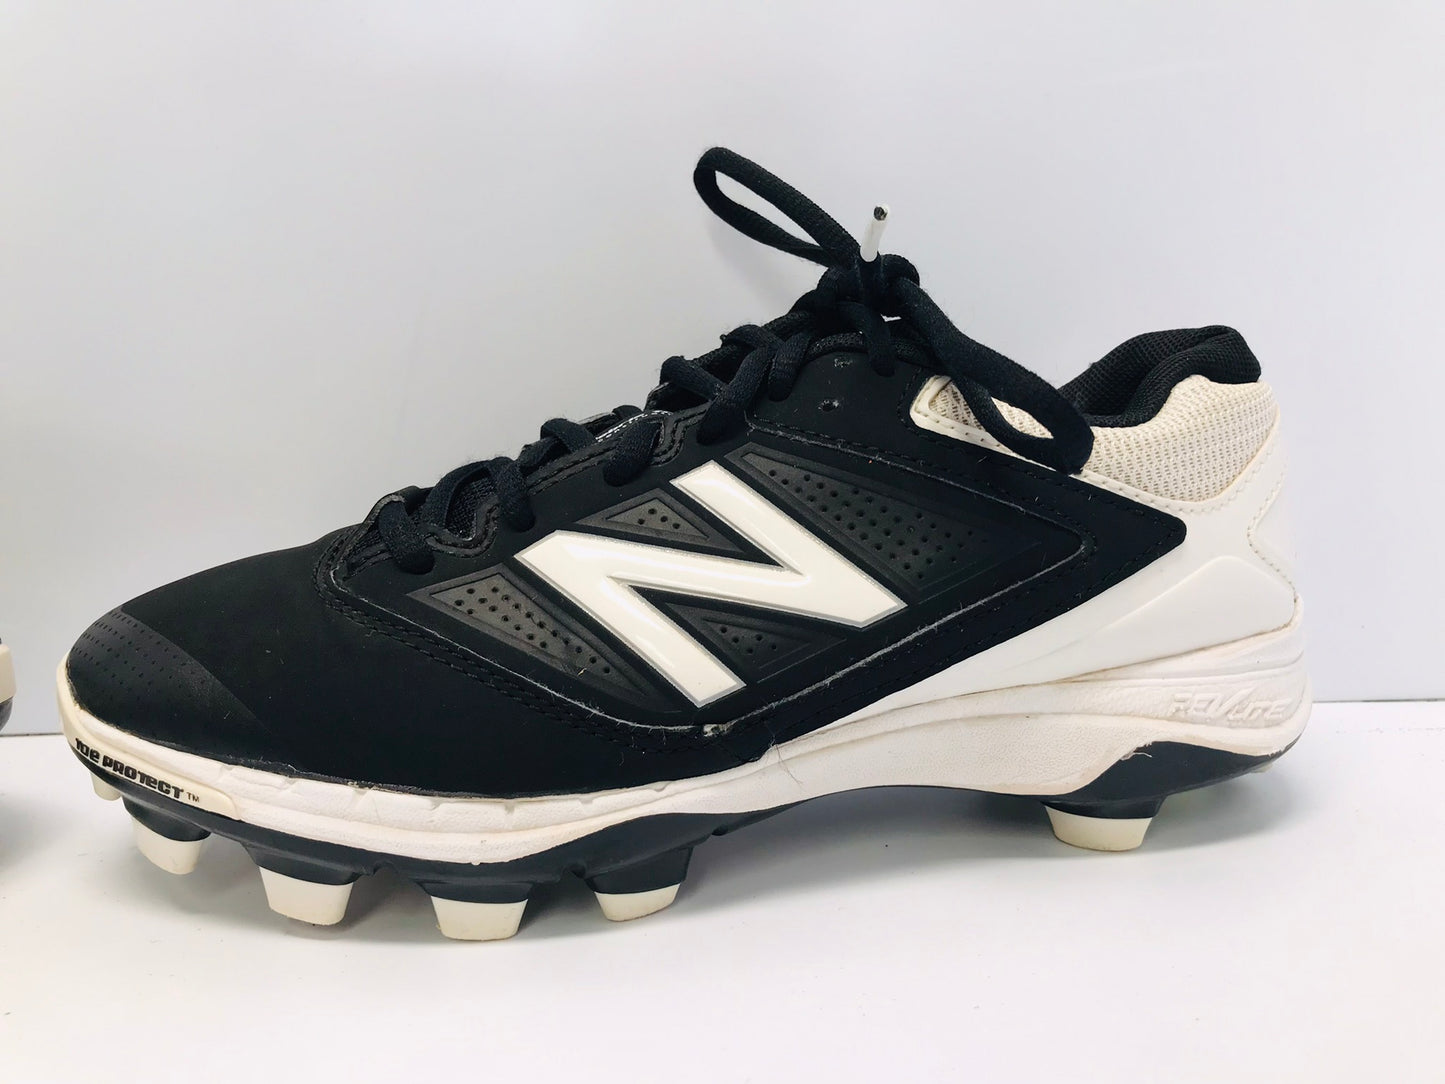 Baseball Shoes Cleats Men's Size 7 New Balence Black White Excellent